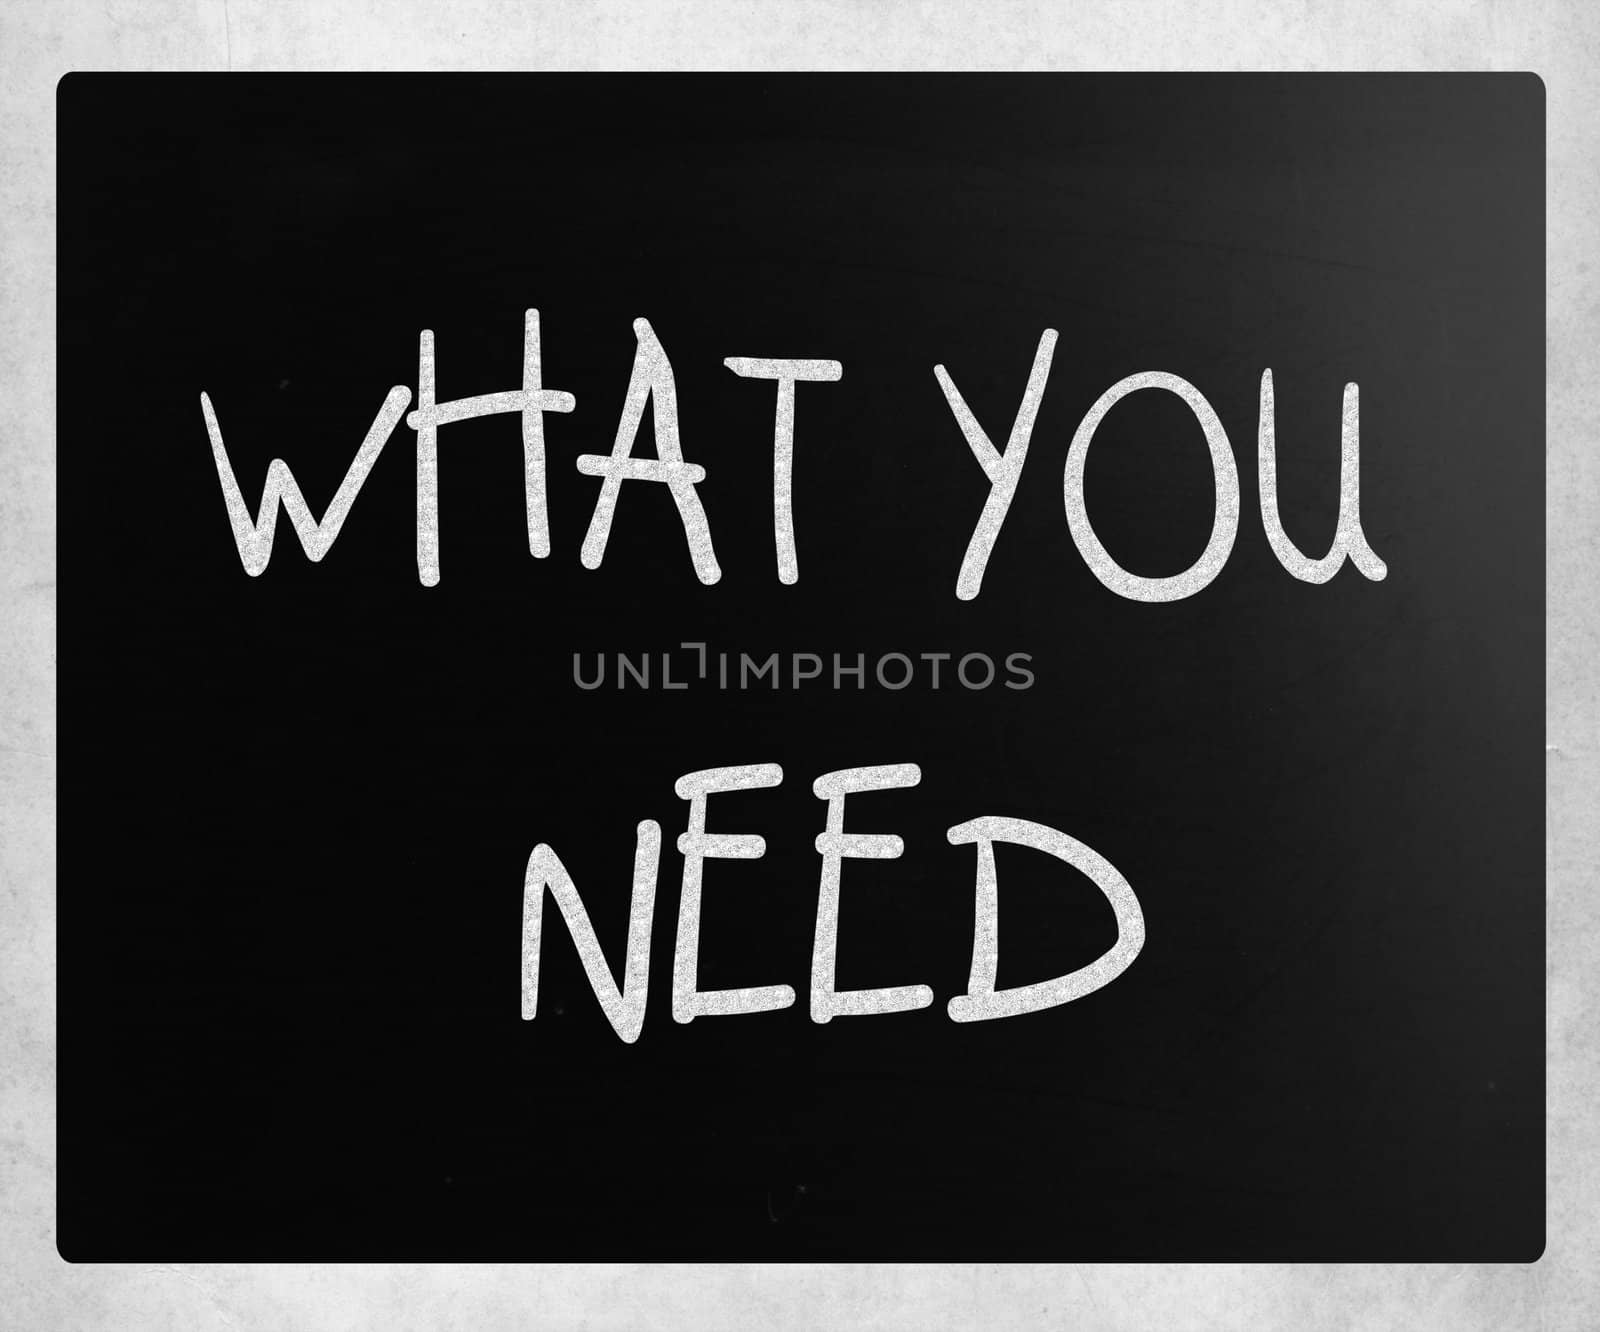 "What you need" handwritten with white chalk on a blackboard